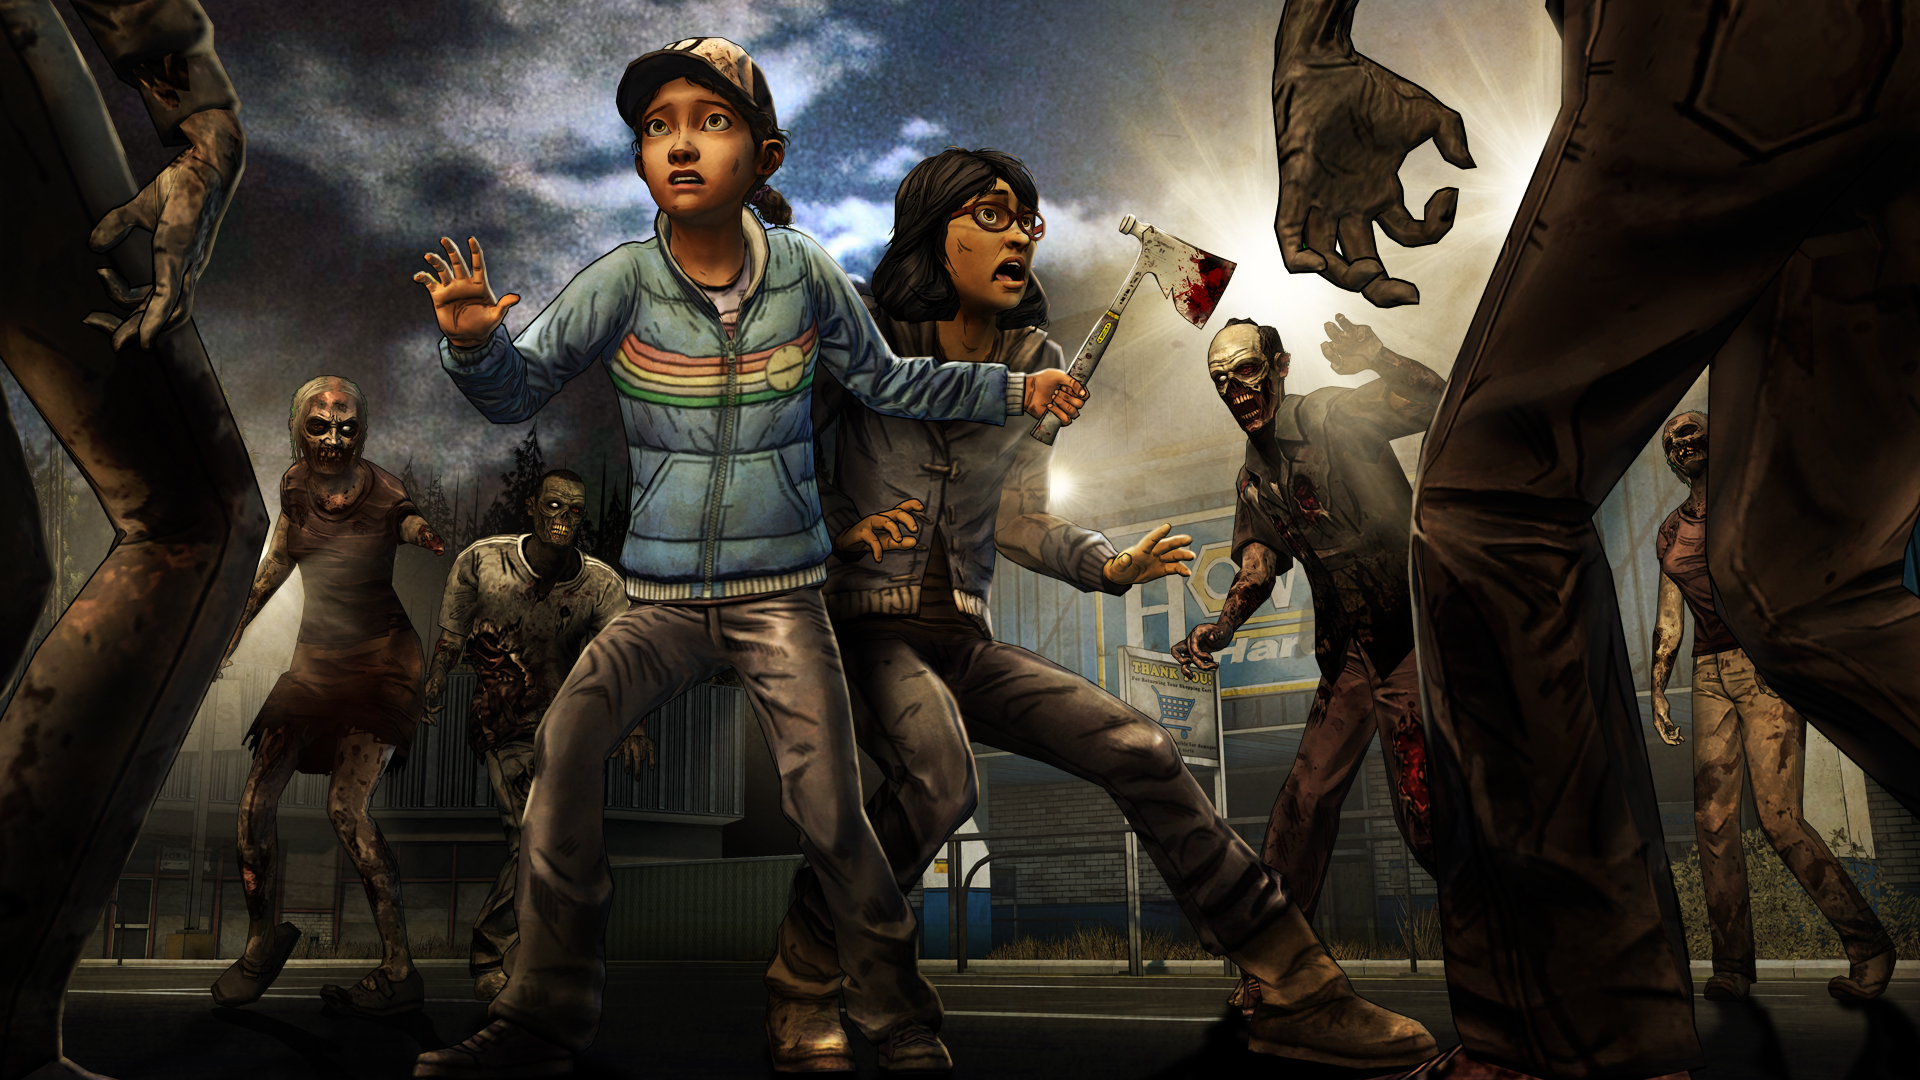 In Season 2 of The Walking Dead, do I play as Clementine, or someone else?